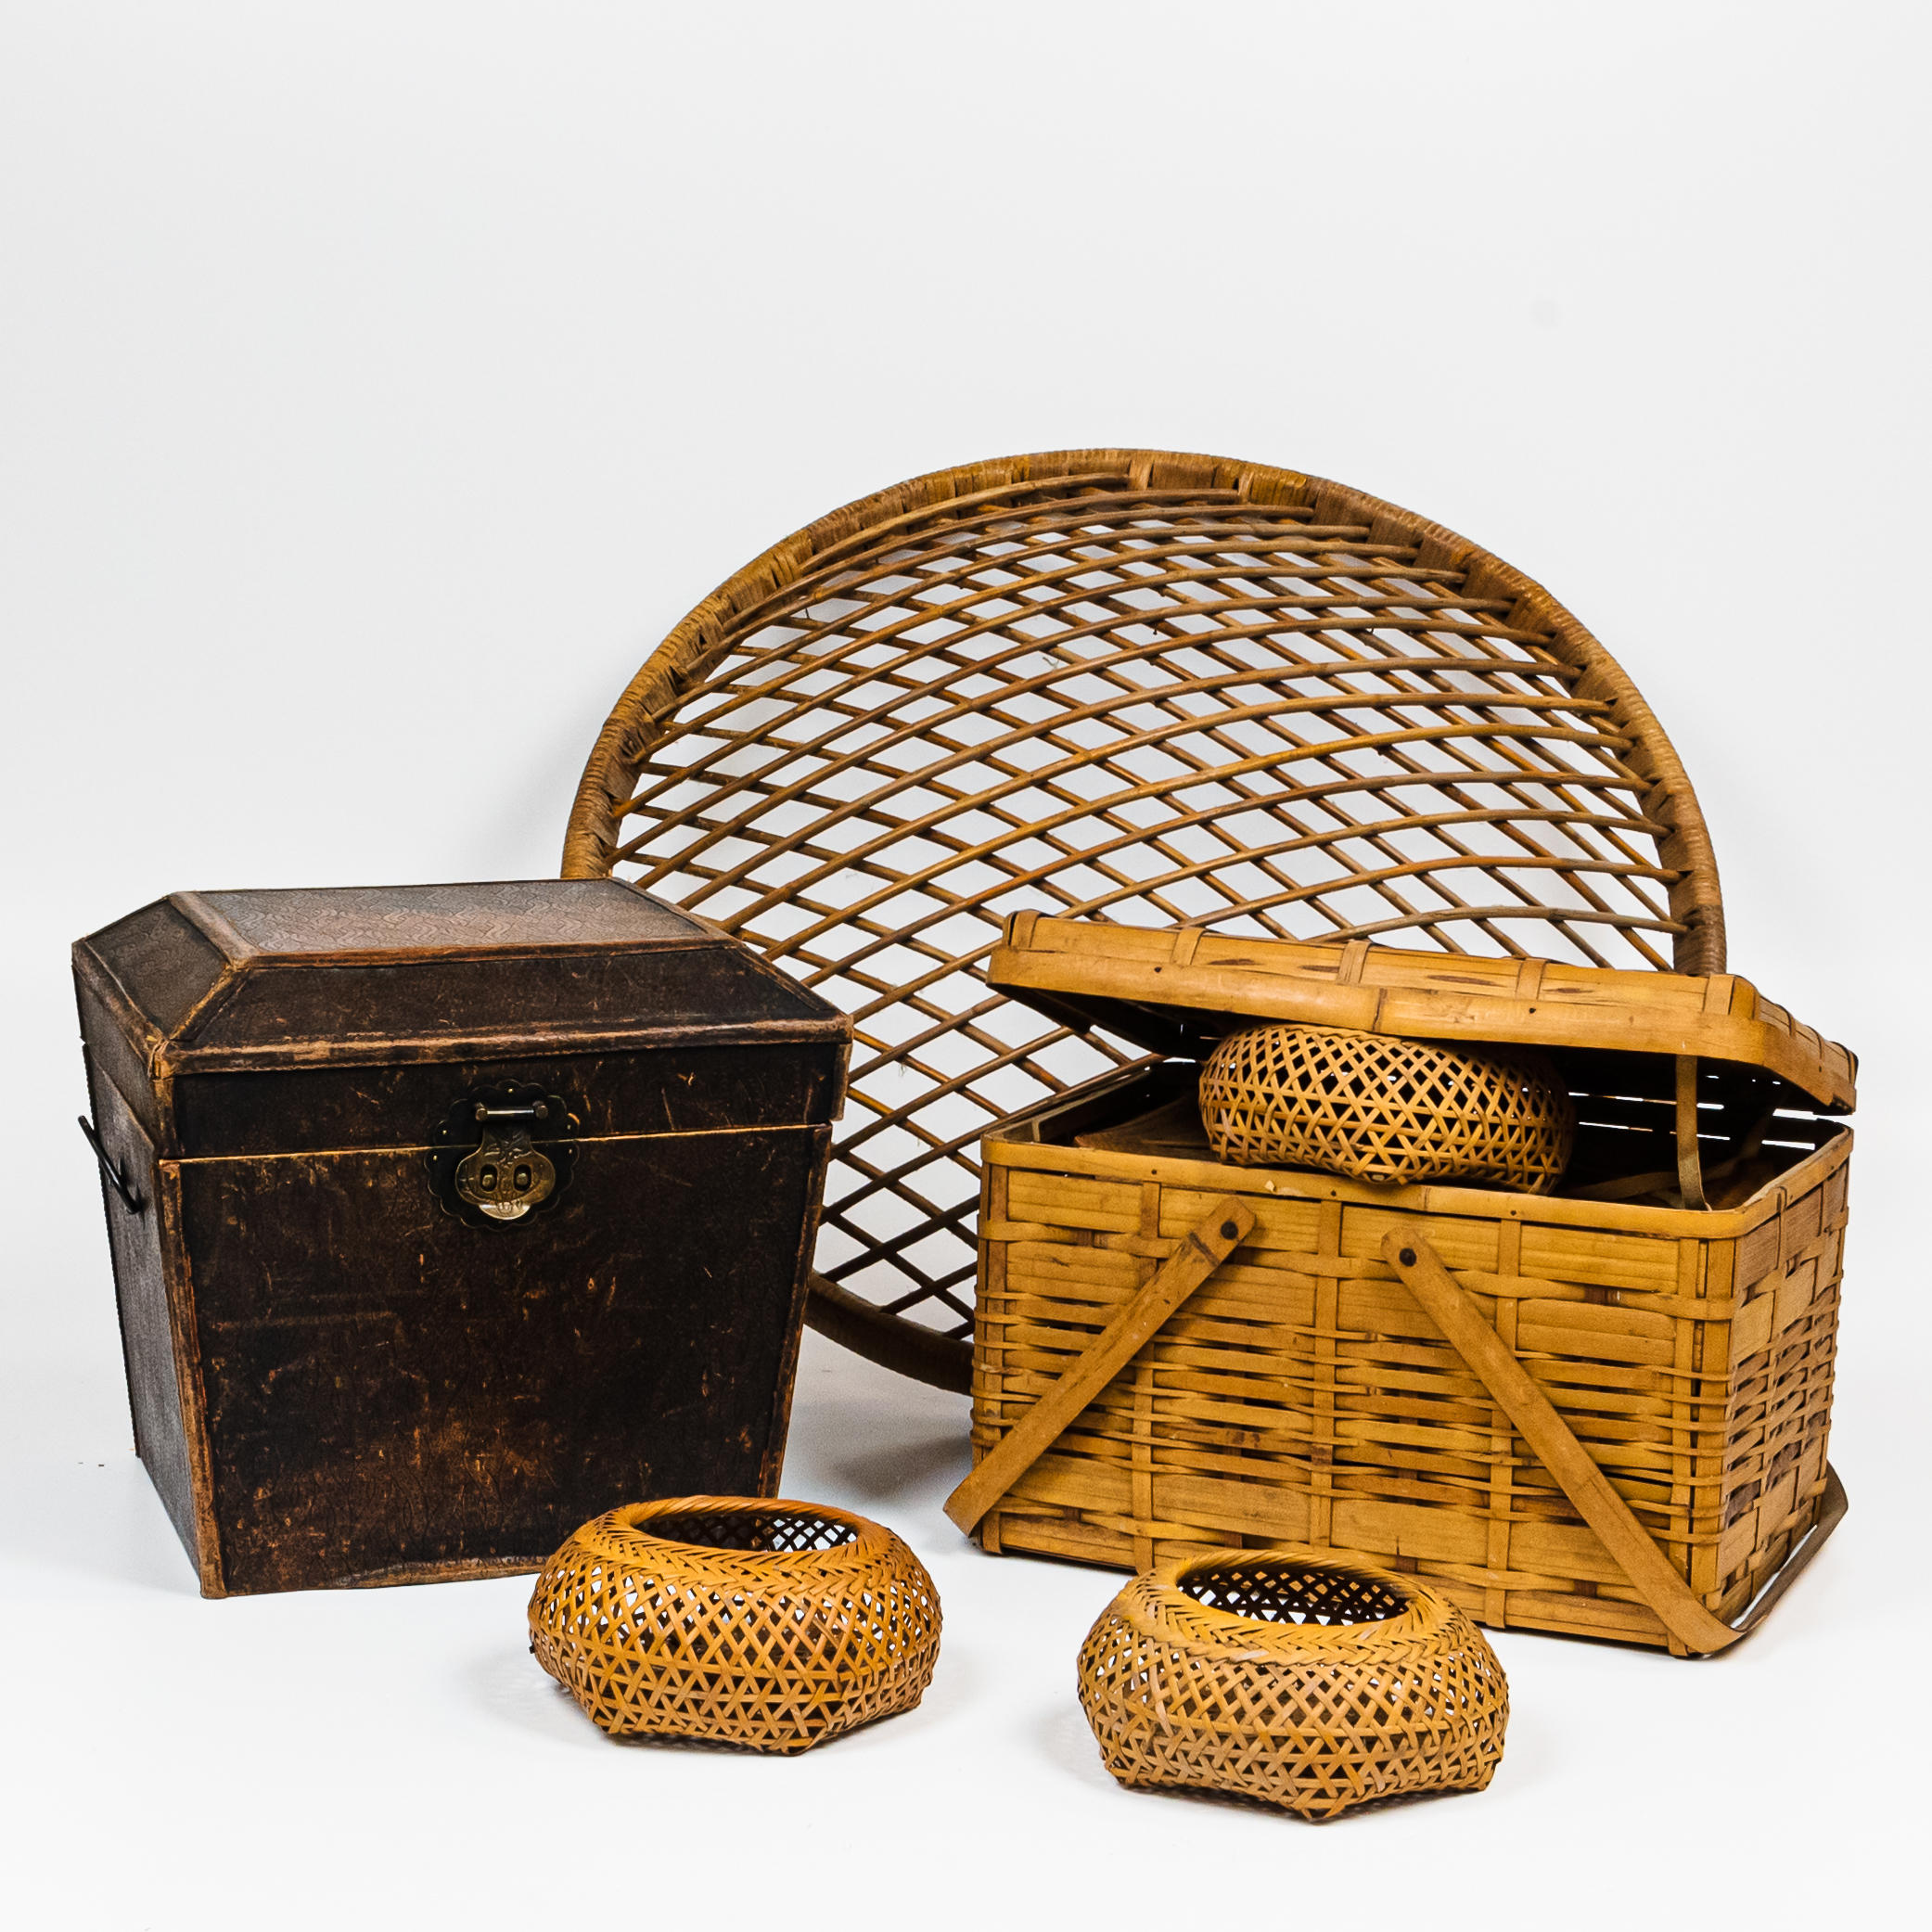 GROUP OF BASKETS AND A SMALL LEATHER